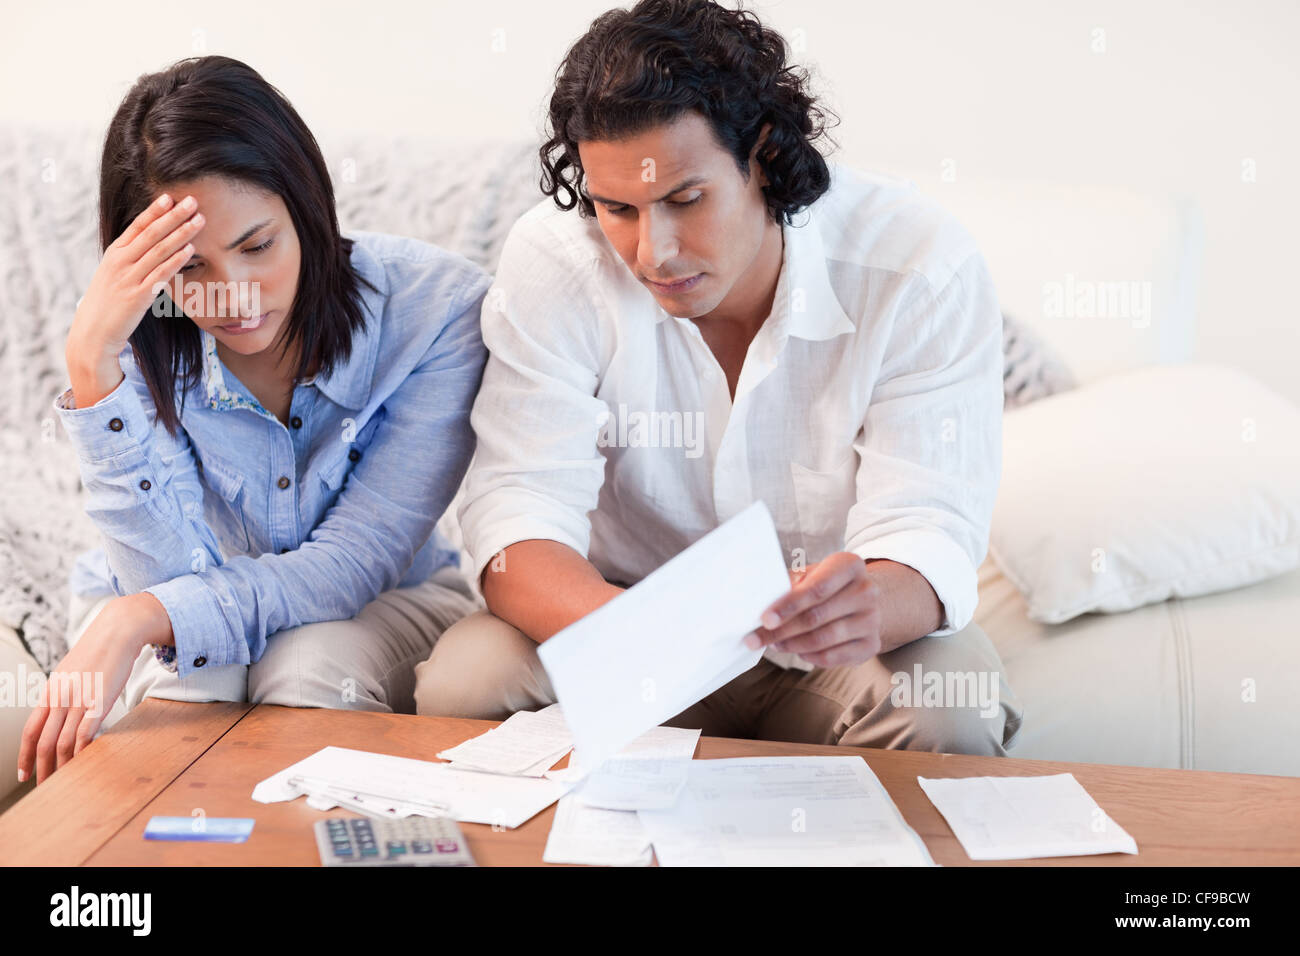 Couple depressed about financial problems Stock Photo